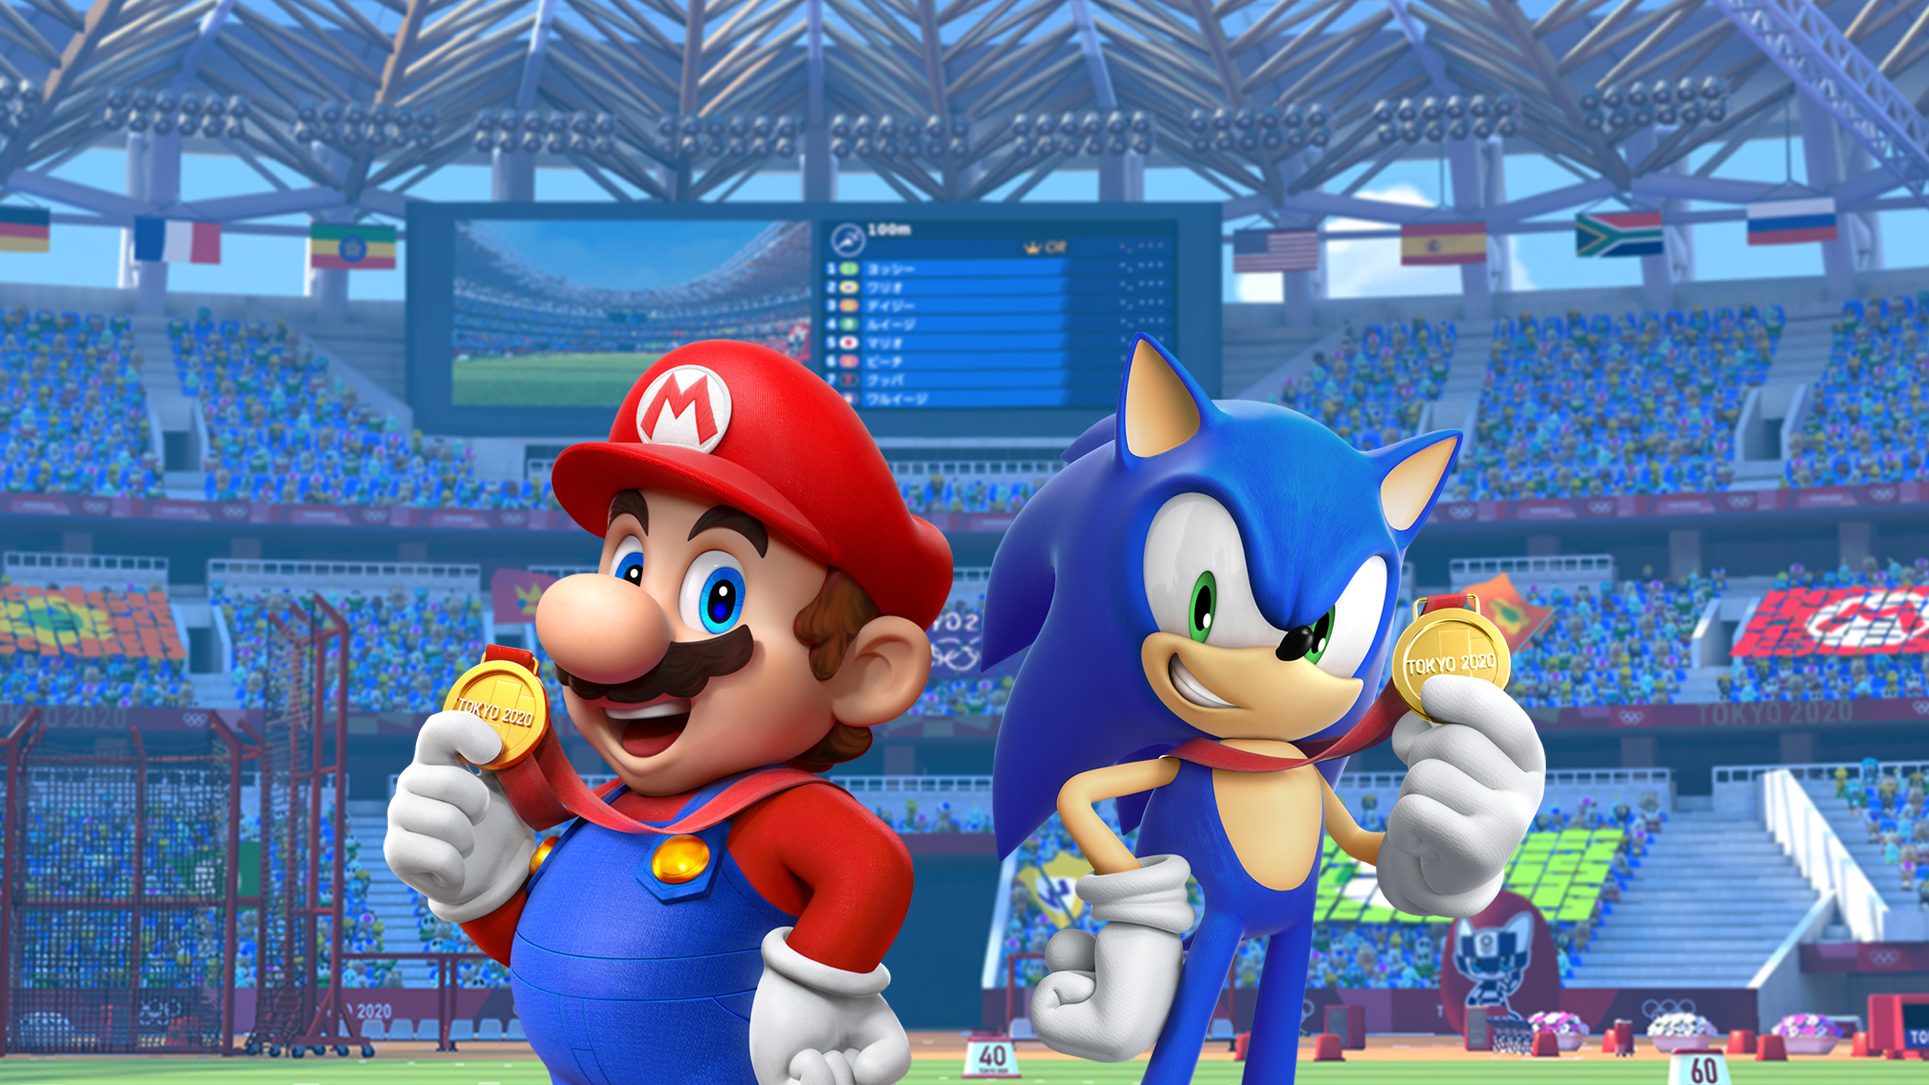 Mario & Sonic at the Olympic Games Tokyo 2020 Promo Art Wallpaper Cat